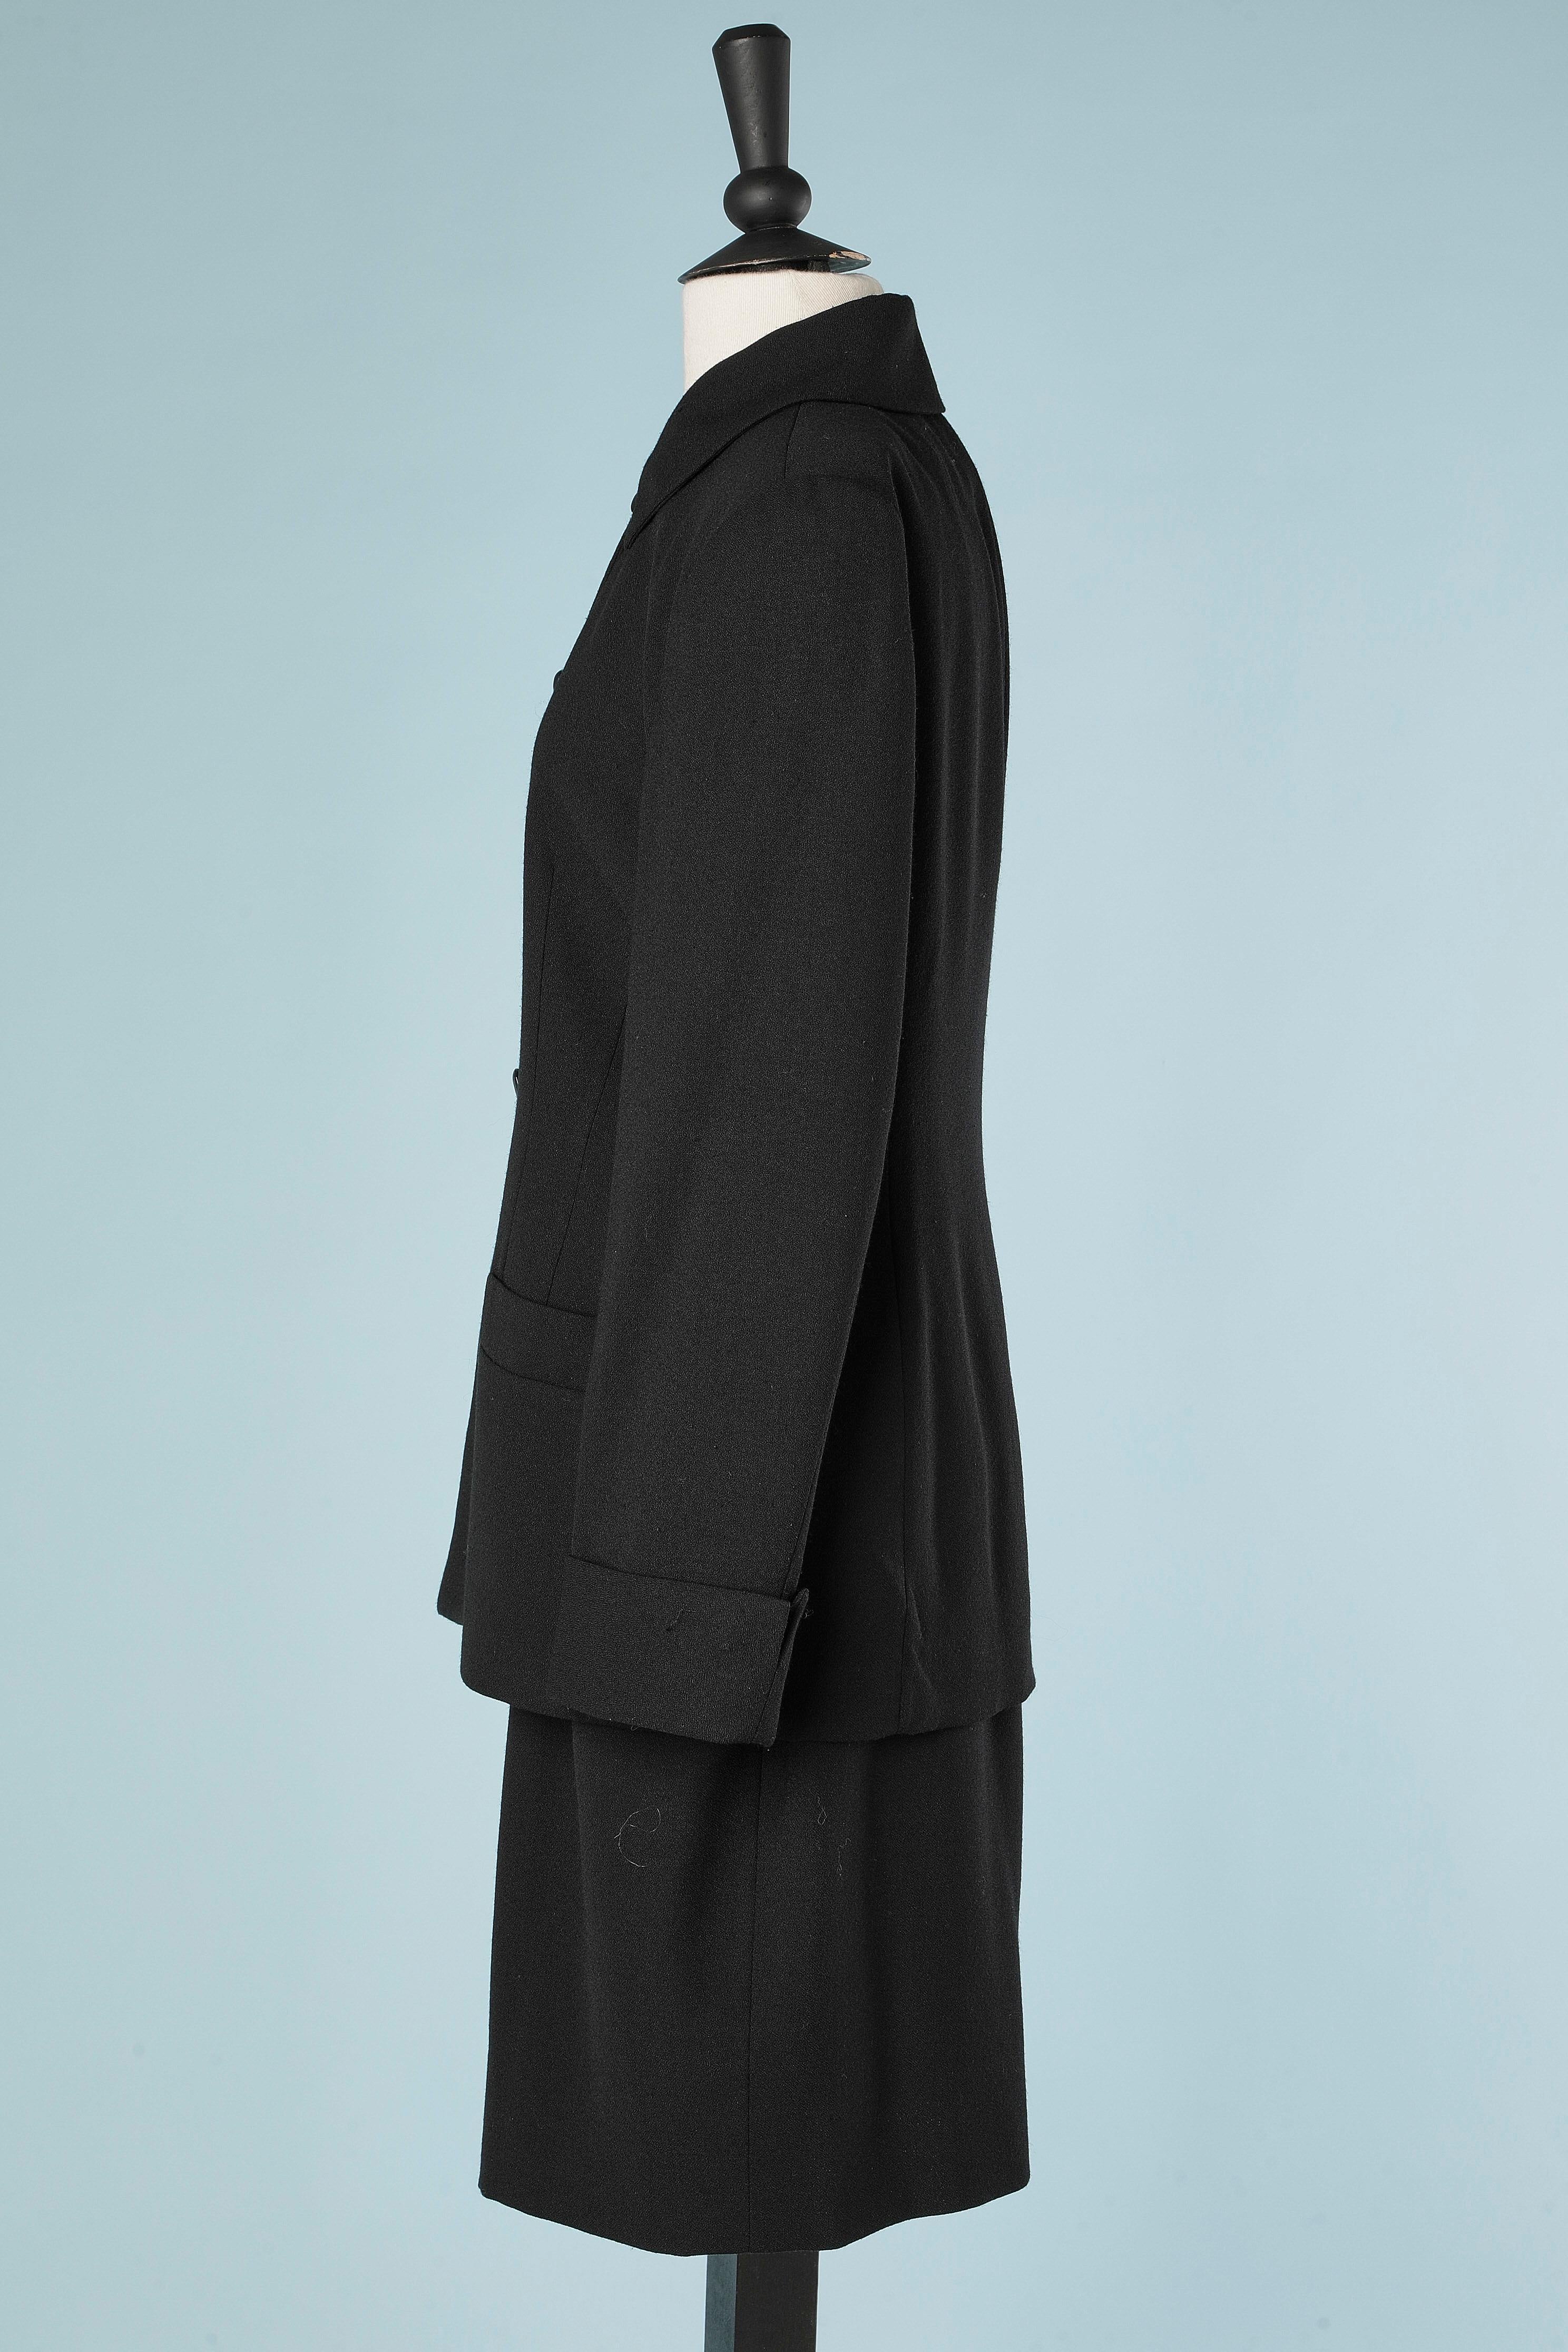 Black crêpe single breasted skirt-suit Christian Dior  For Sale 1